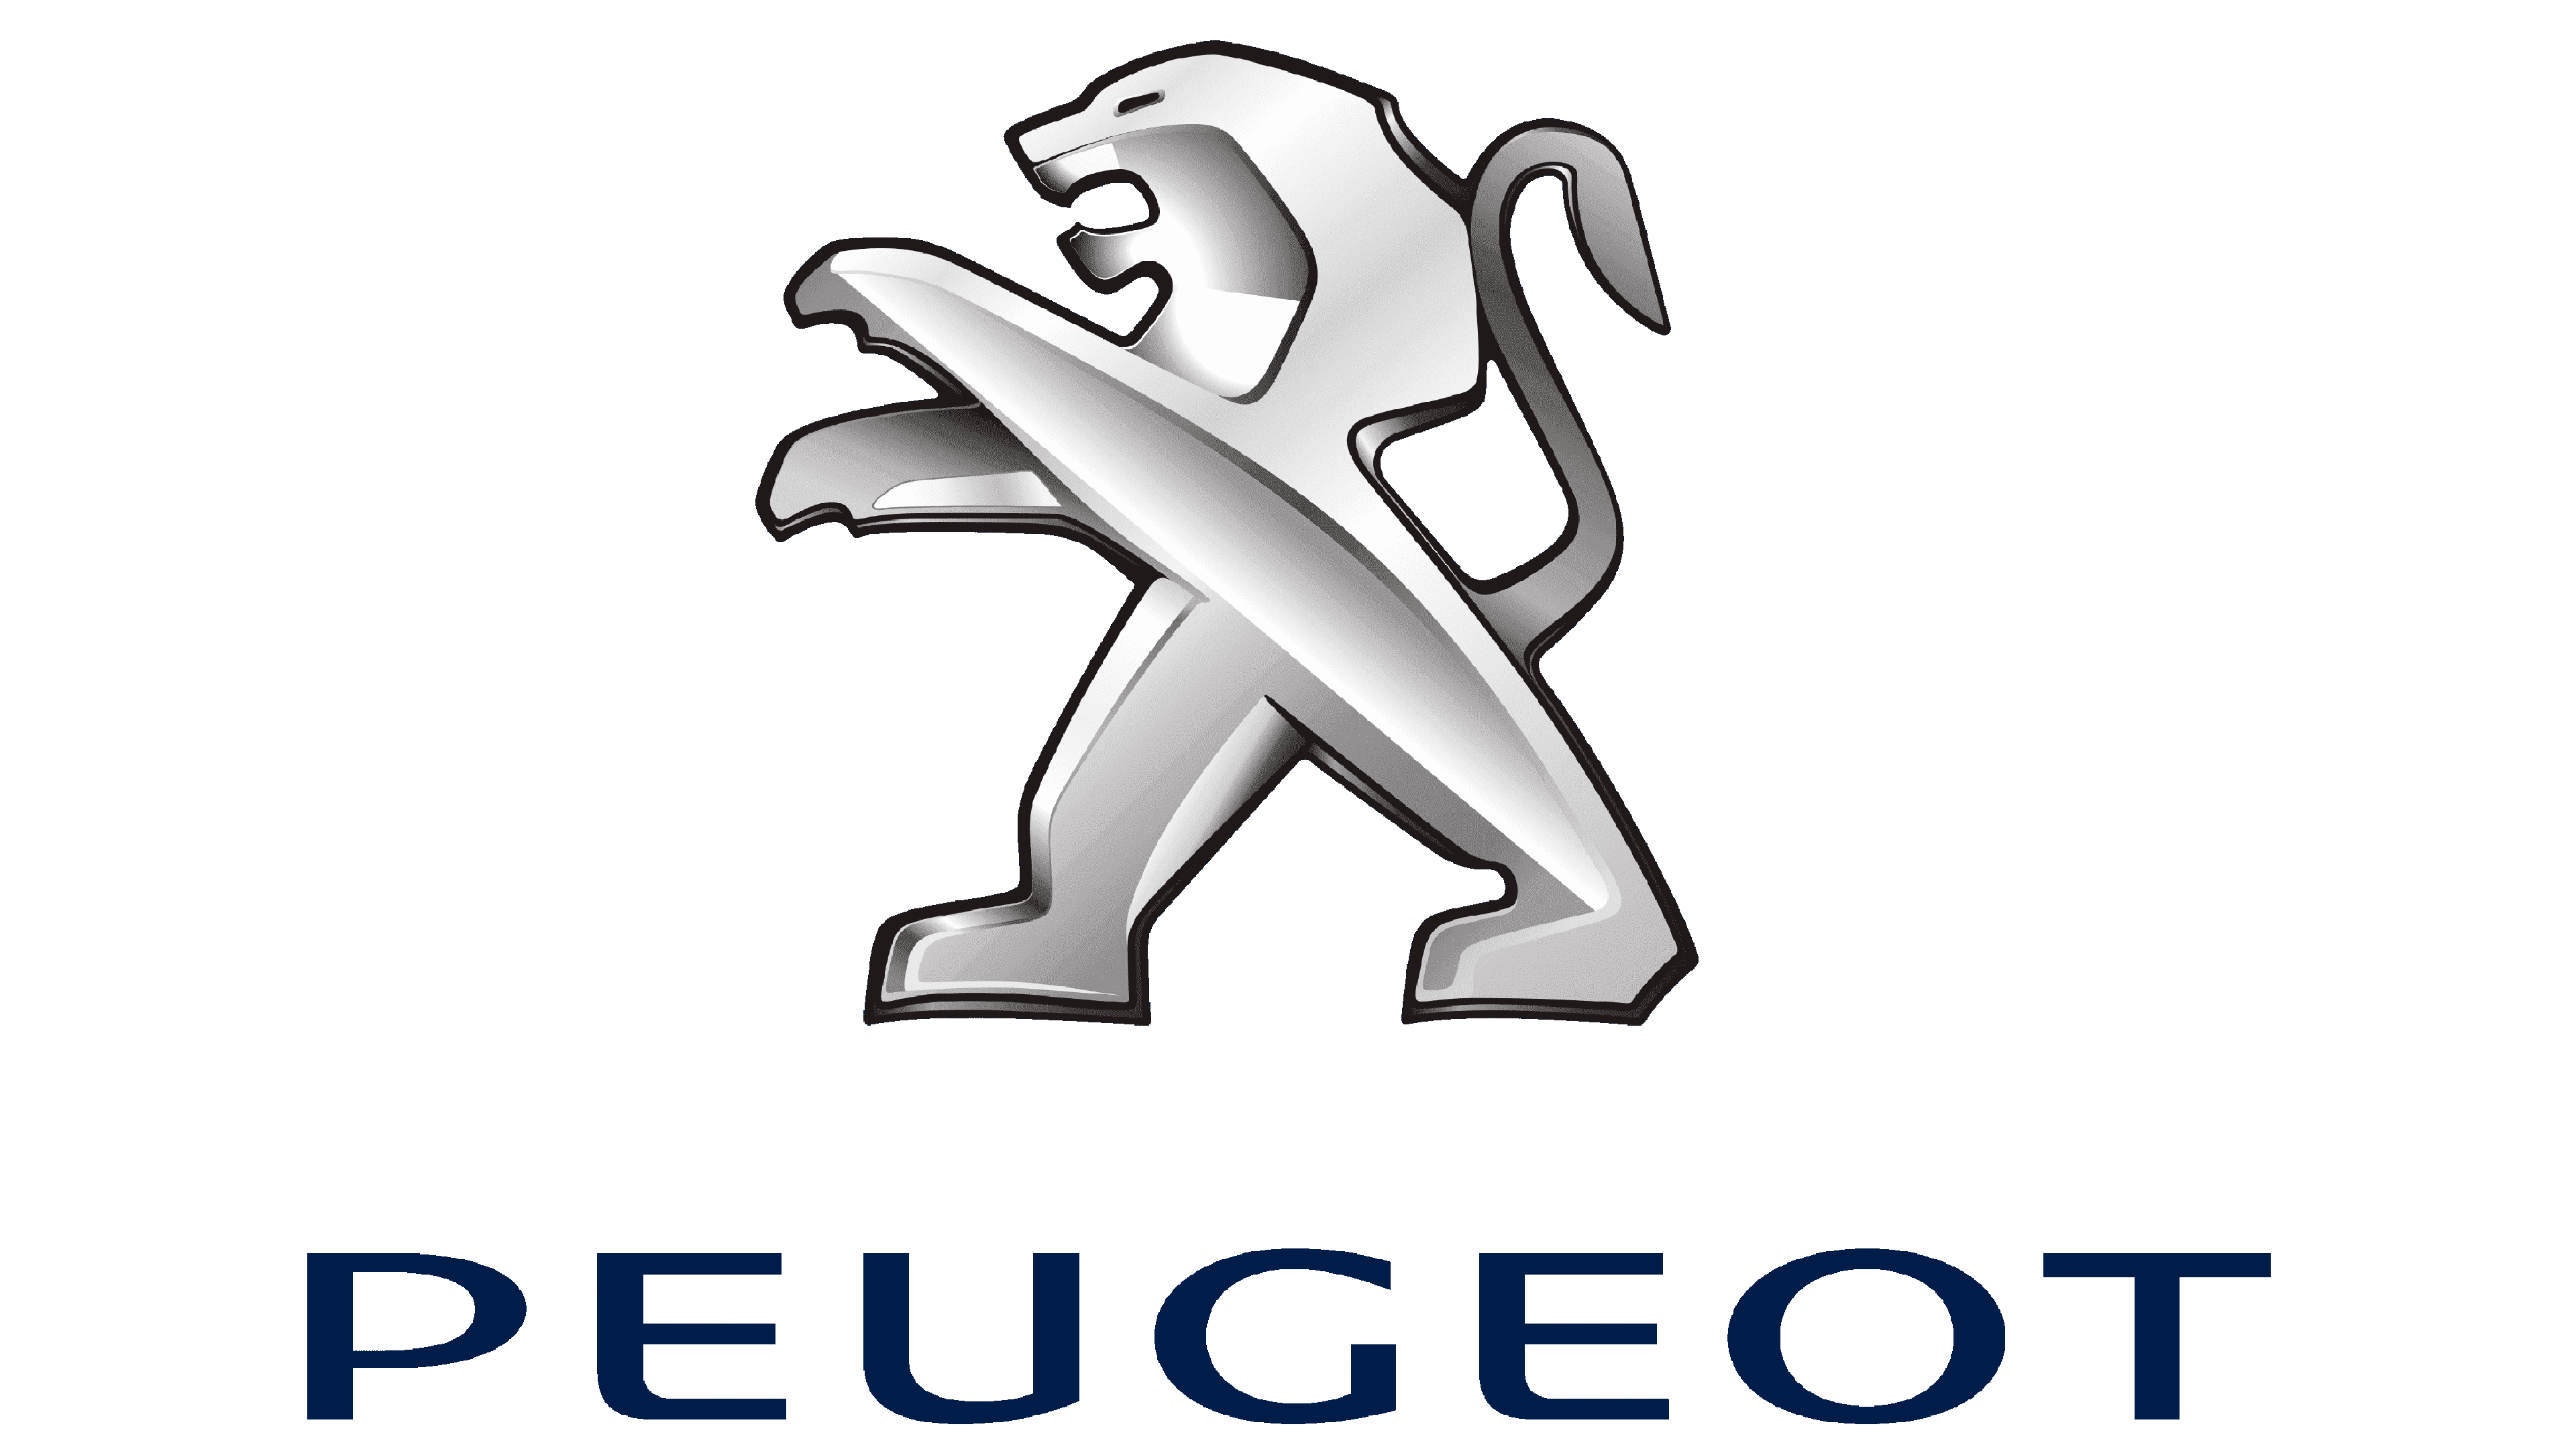 Peugeot Logo, Peugeot Car Symbol Meaning and History